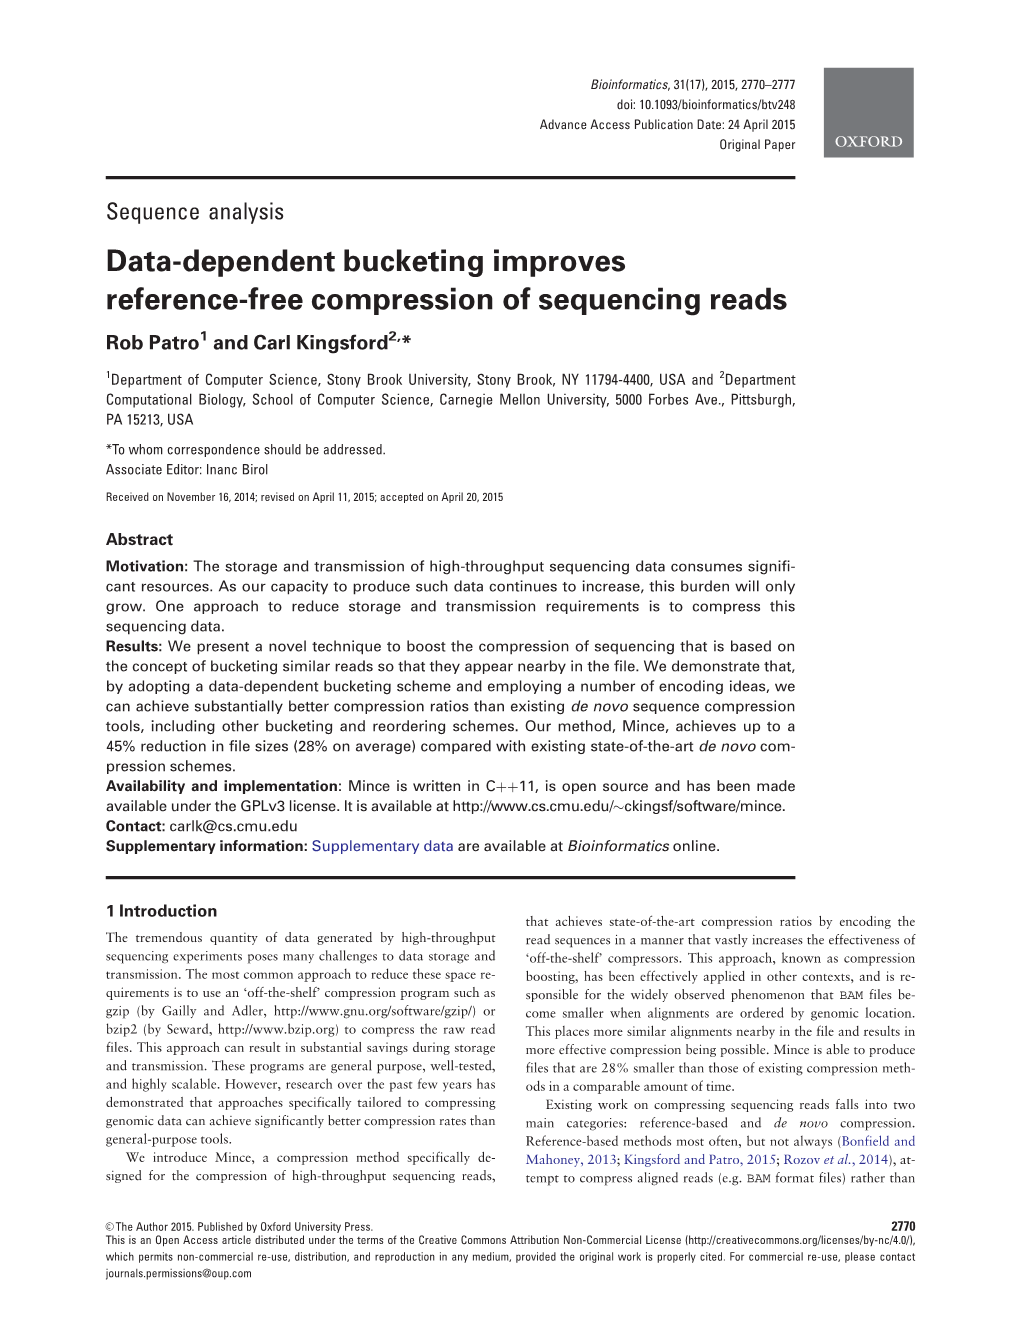 Sequence Analysis Data-Dependent Bucketing Improves Reference-Free Compression of Sequencing Reads Rob Patro1 and Carl Kingsford2,*